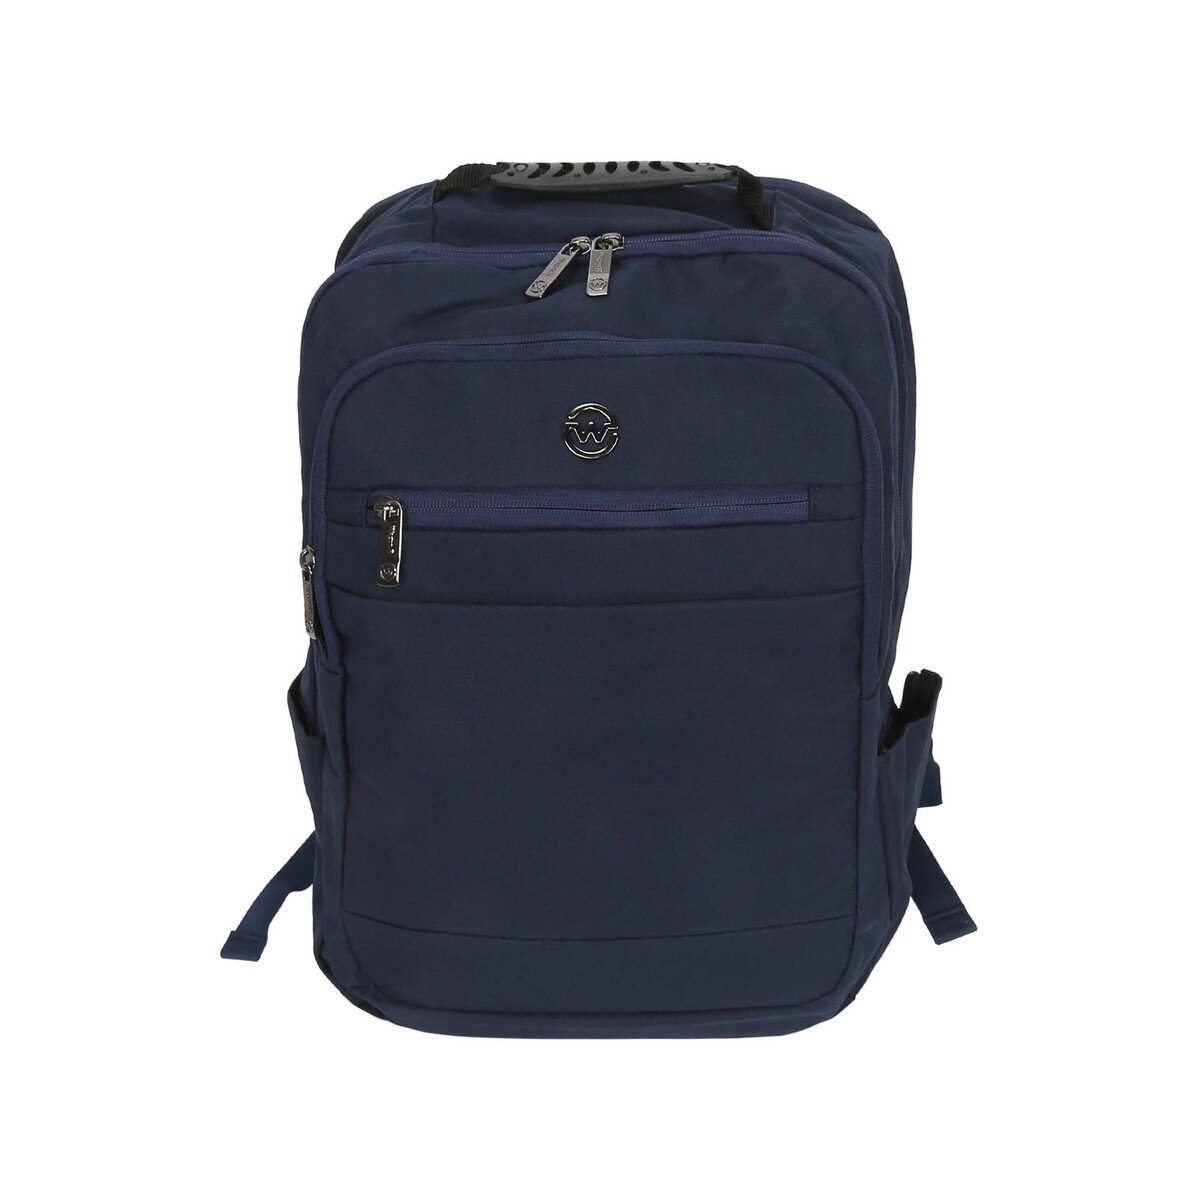 Wagon R Laptop Backpack BP-1778 Assorted